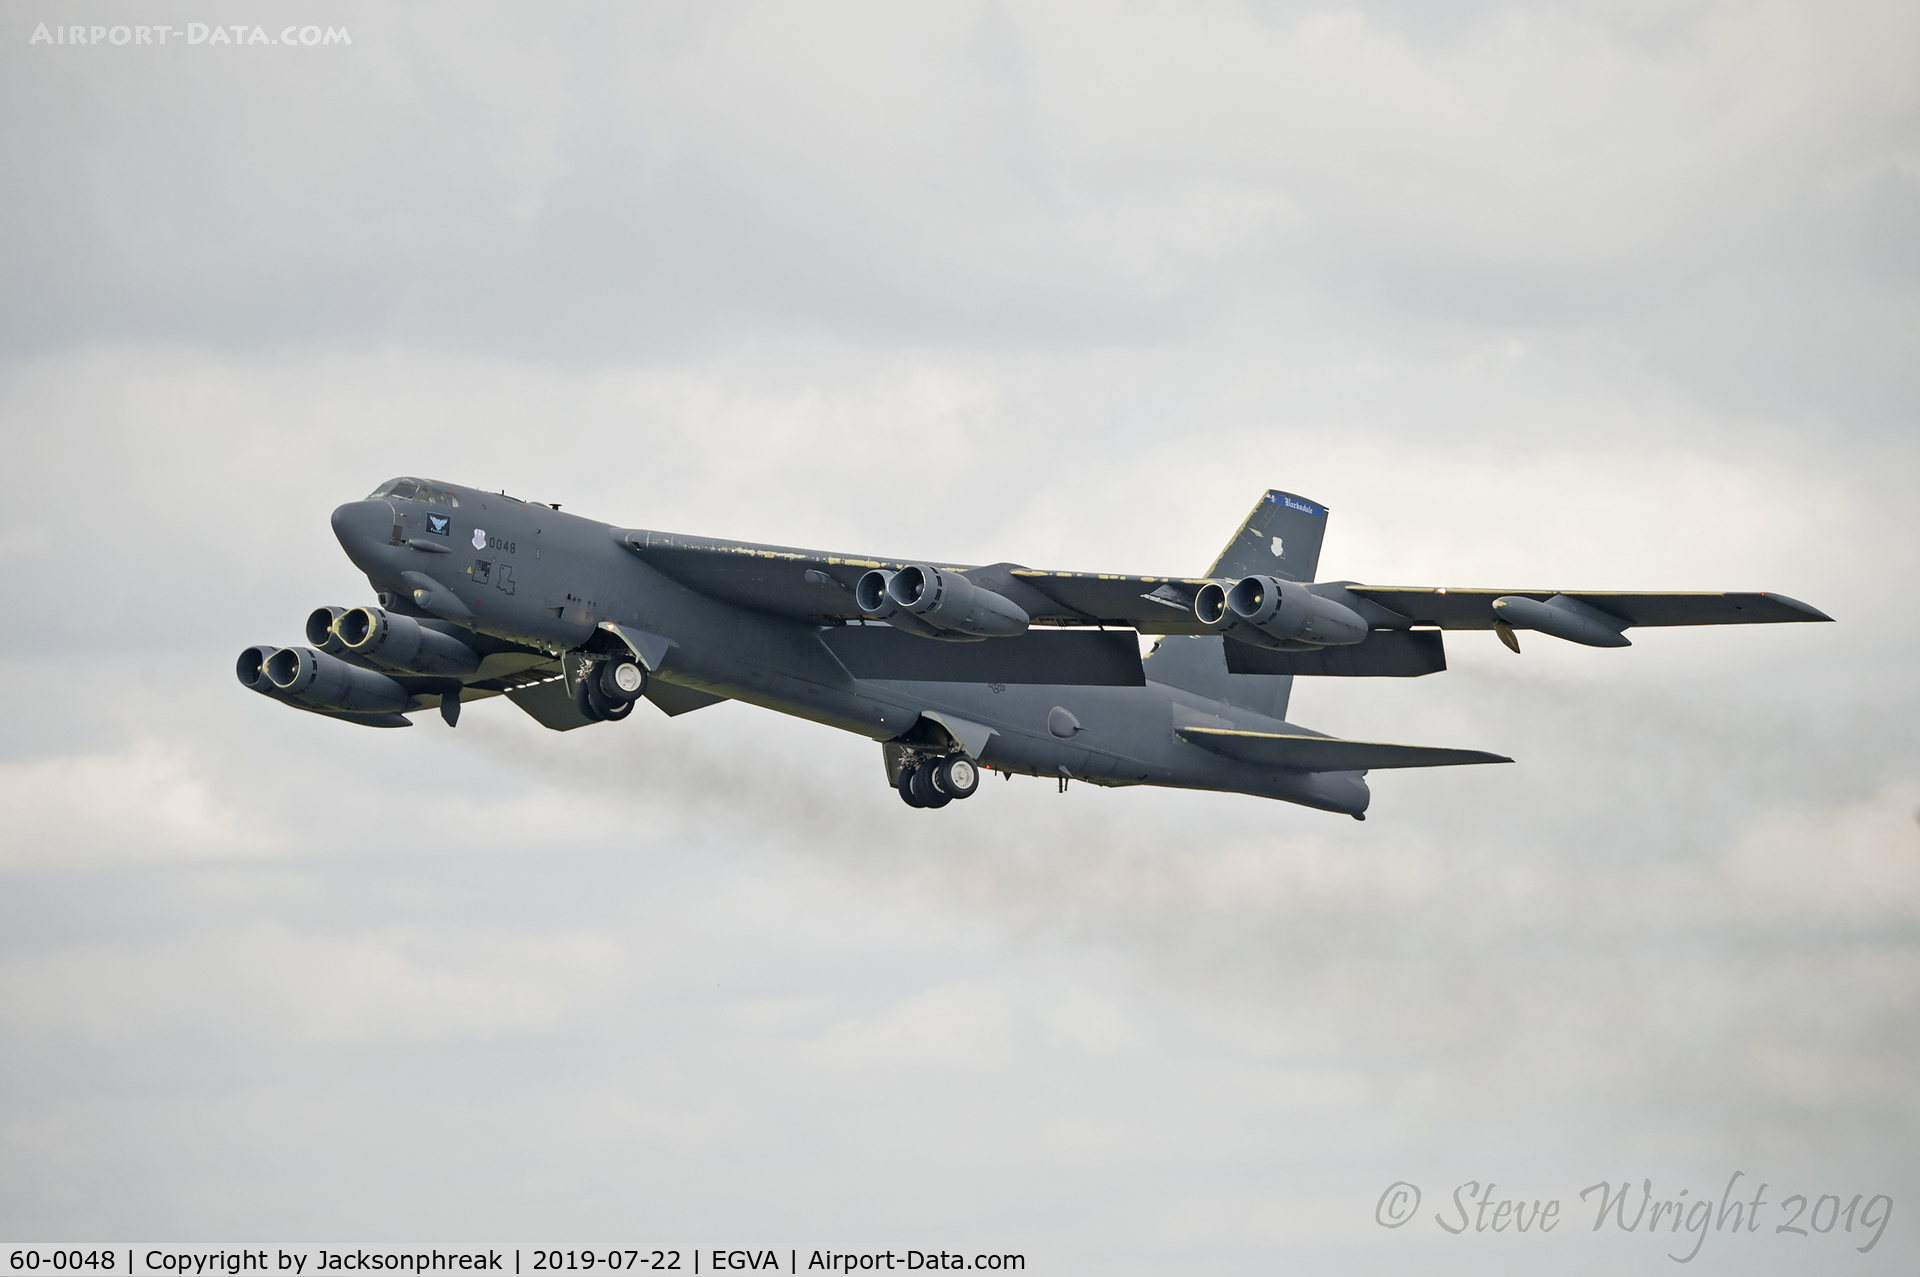 60-0048, 1960 Boeing B-52H Stratofortress C/N 464413, Take off from RAF Fairford UK.